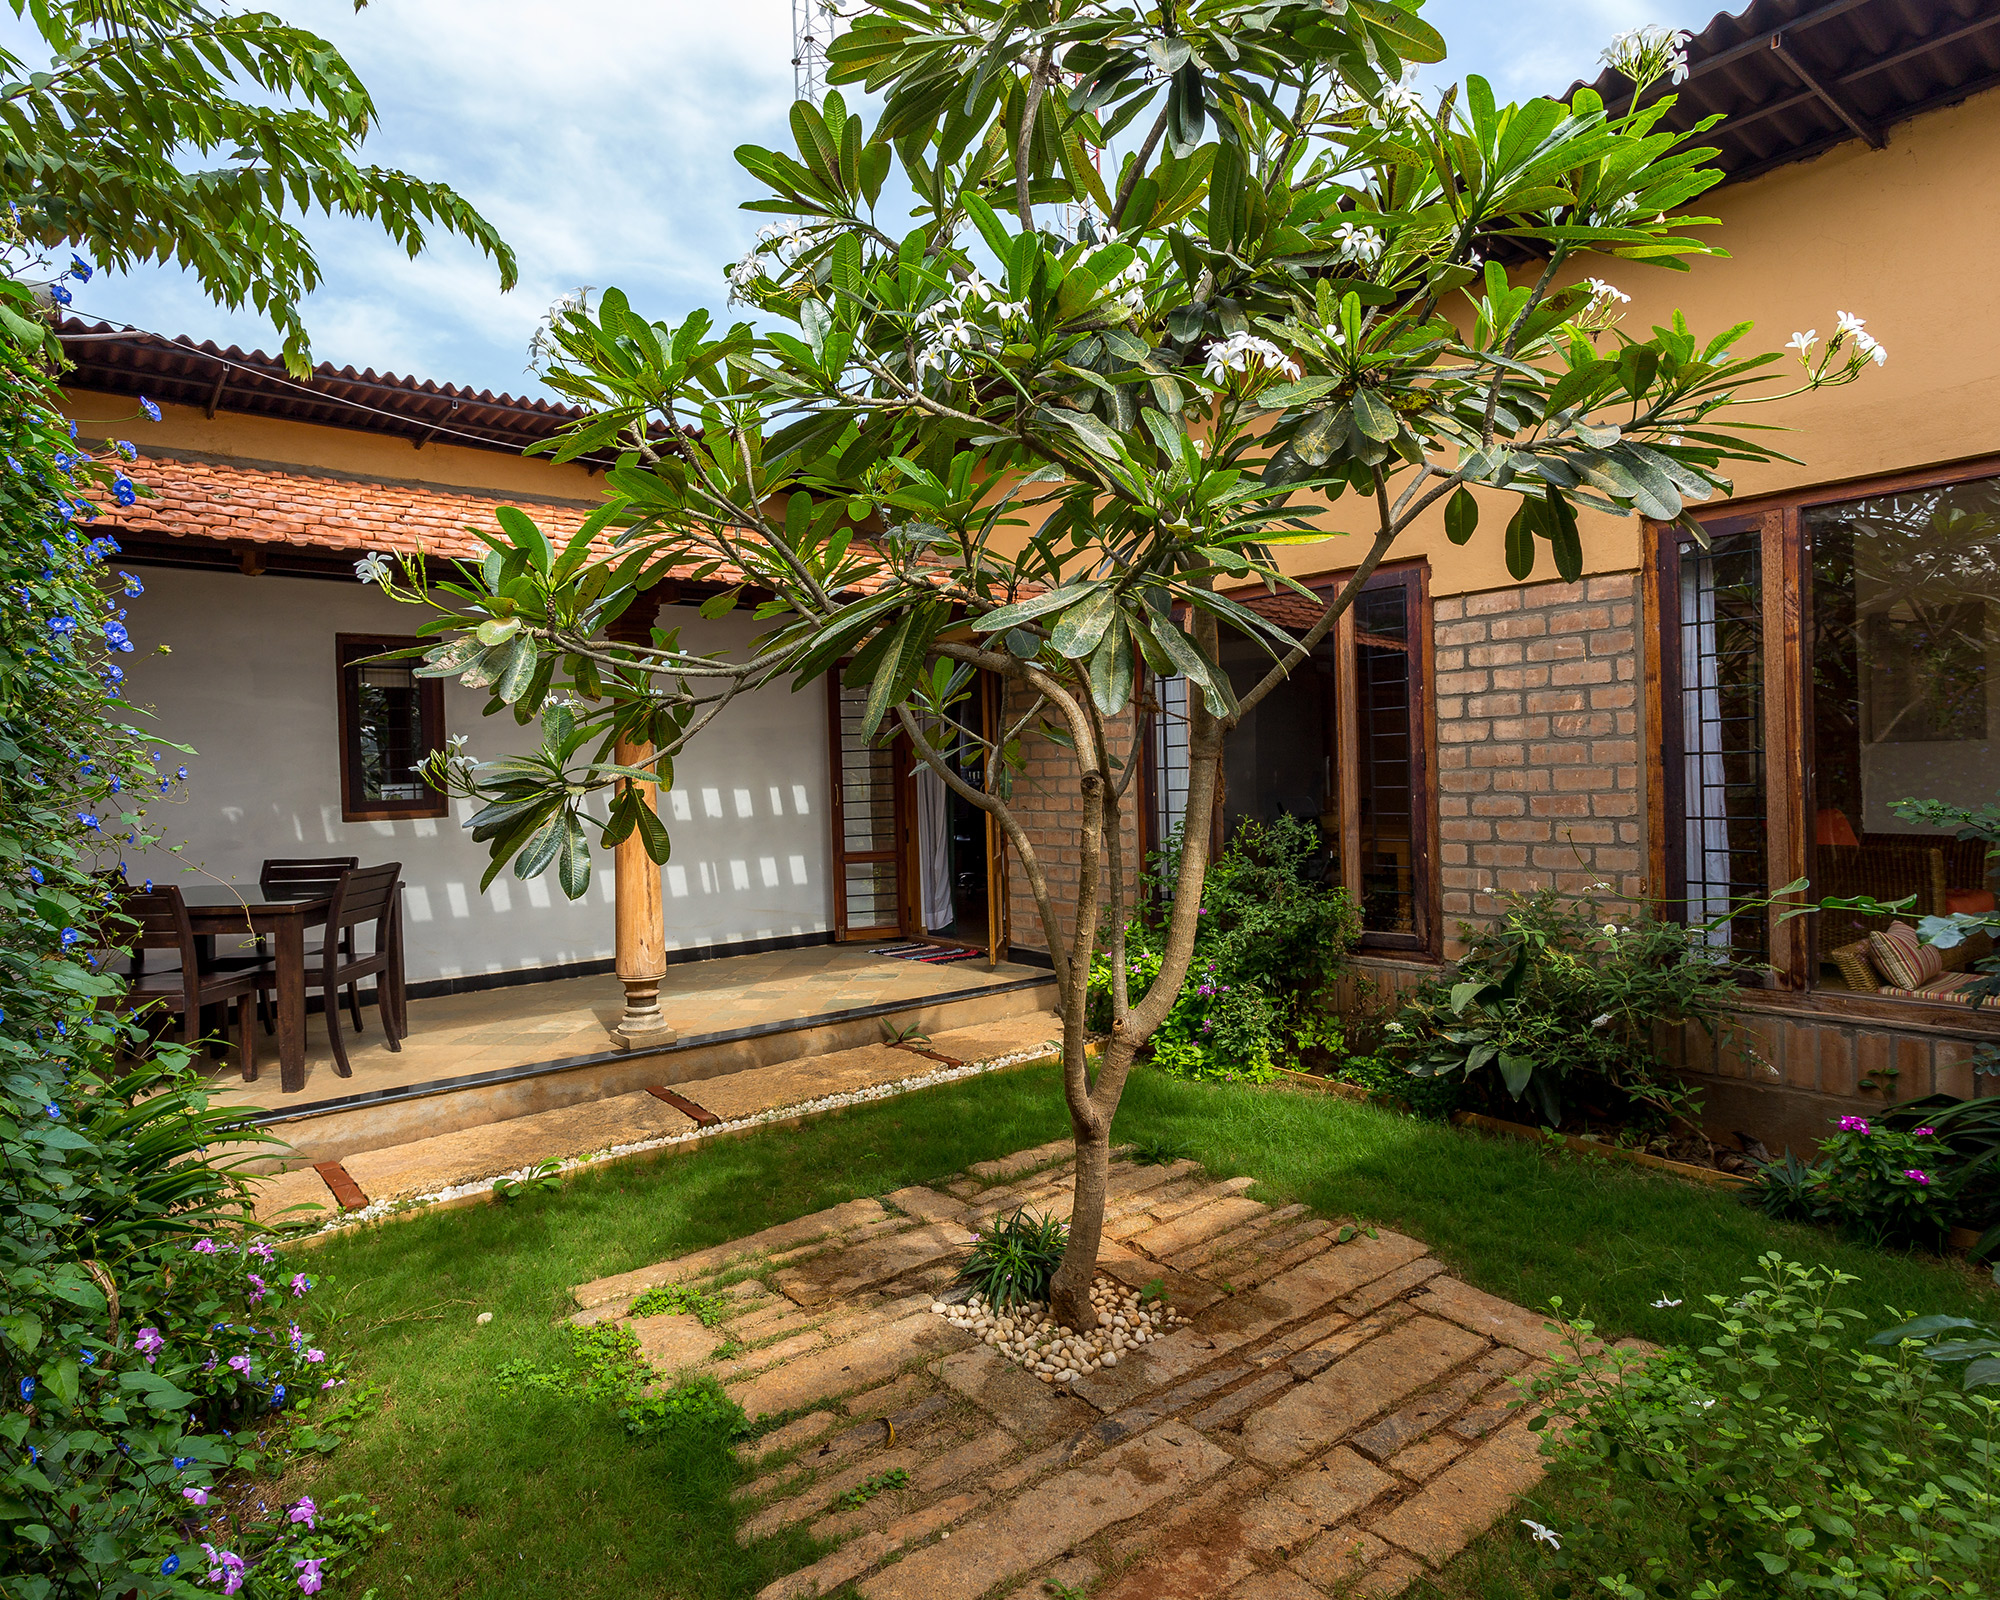 The contemporary courtyard home, which is convenient and relevant to todays' lifestyle